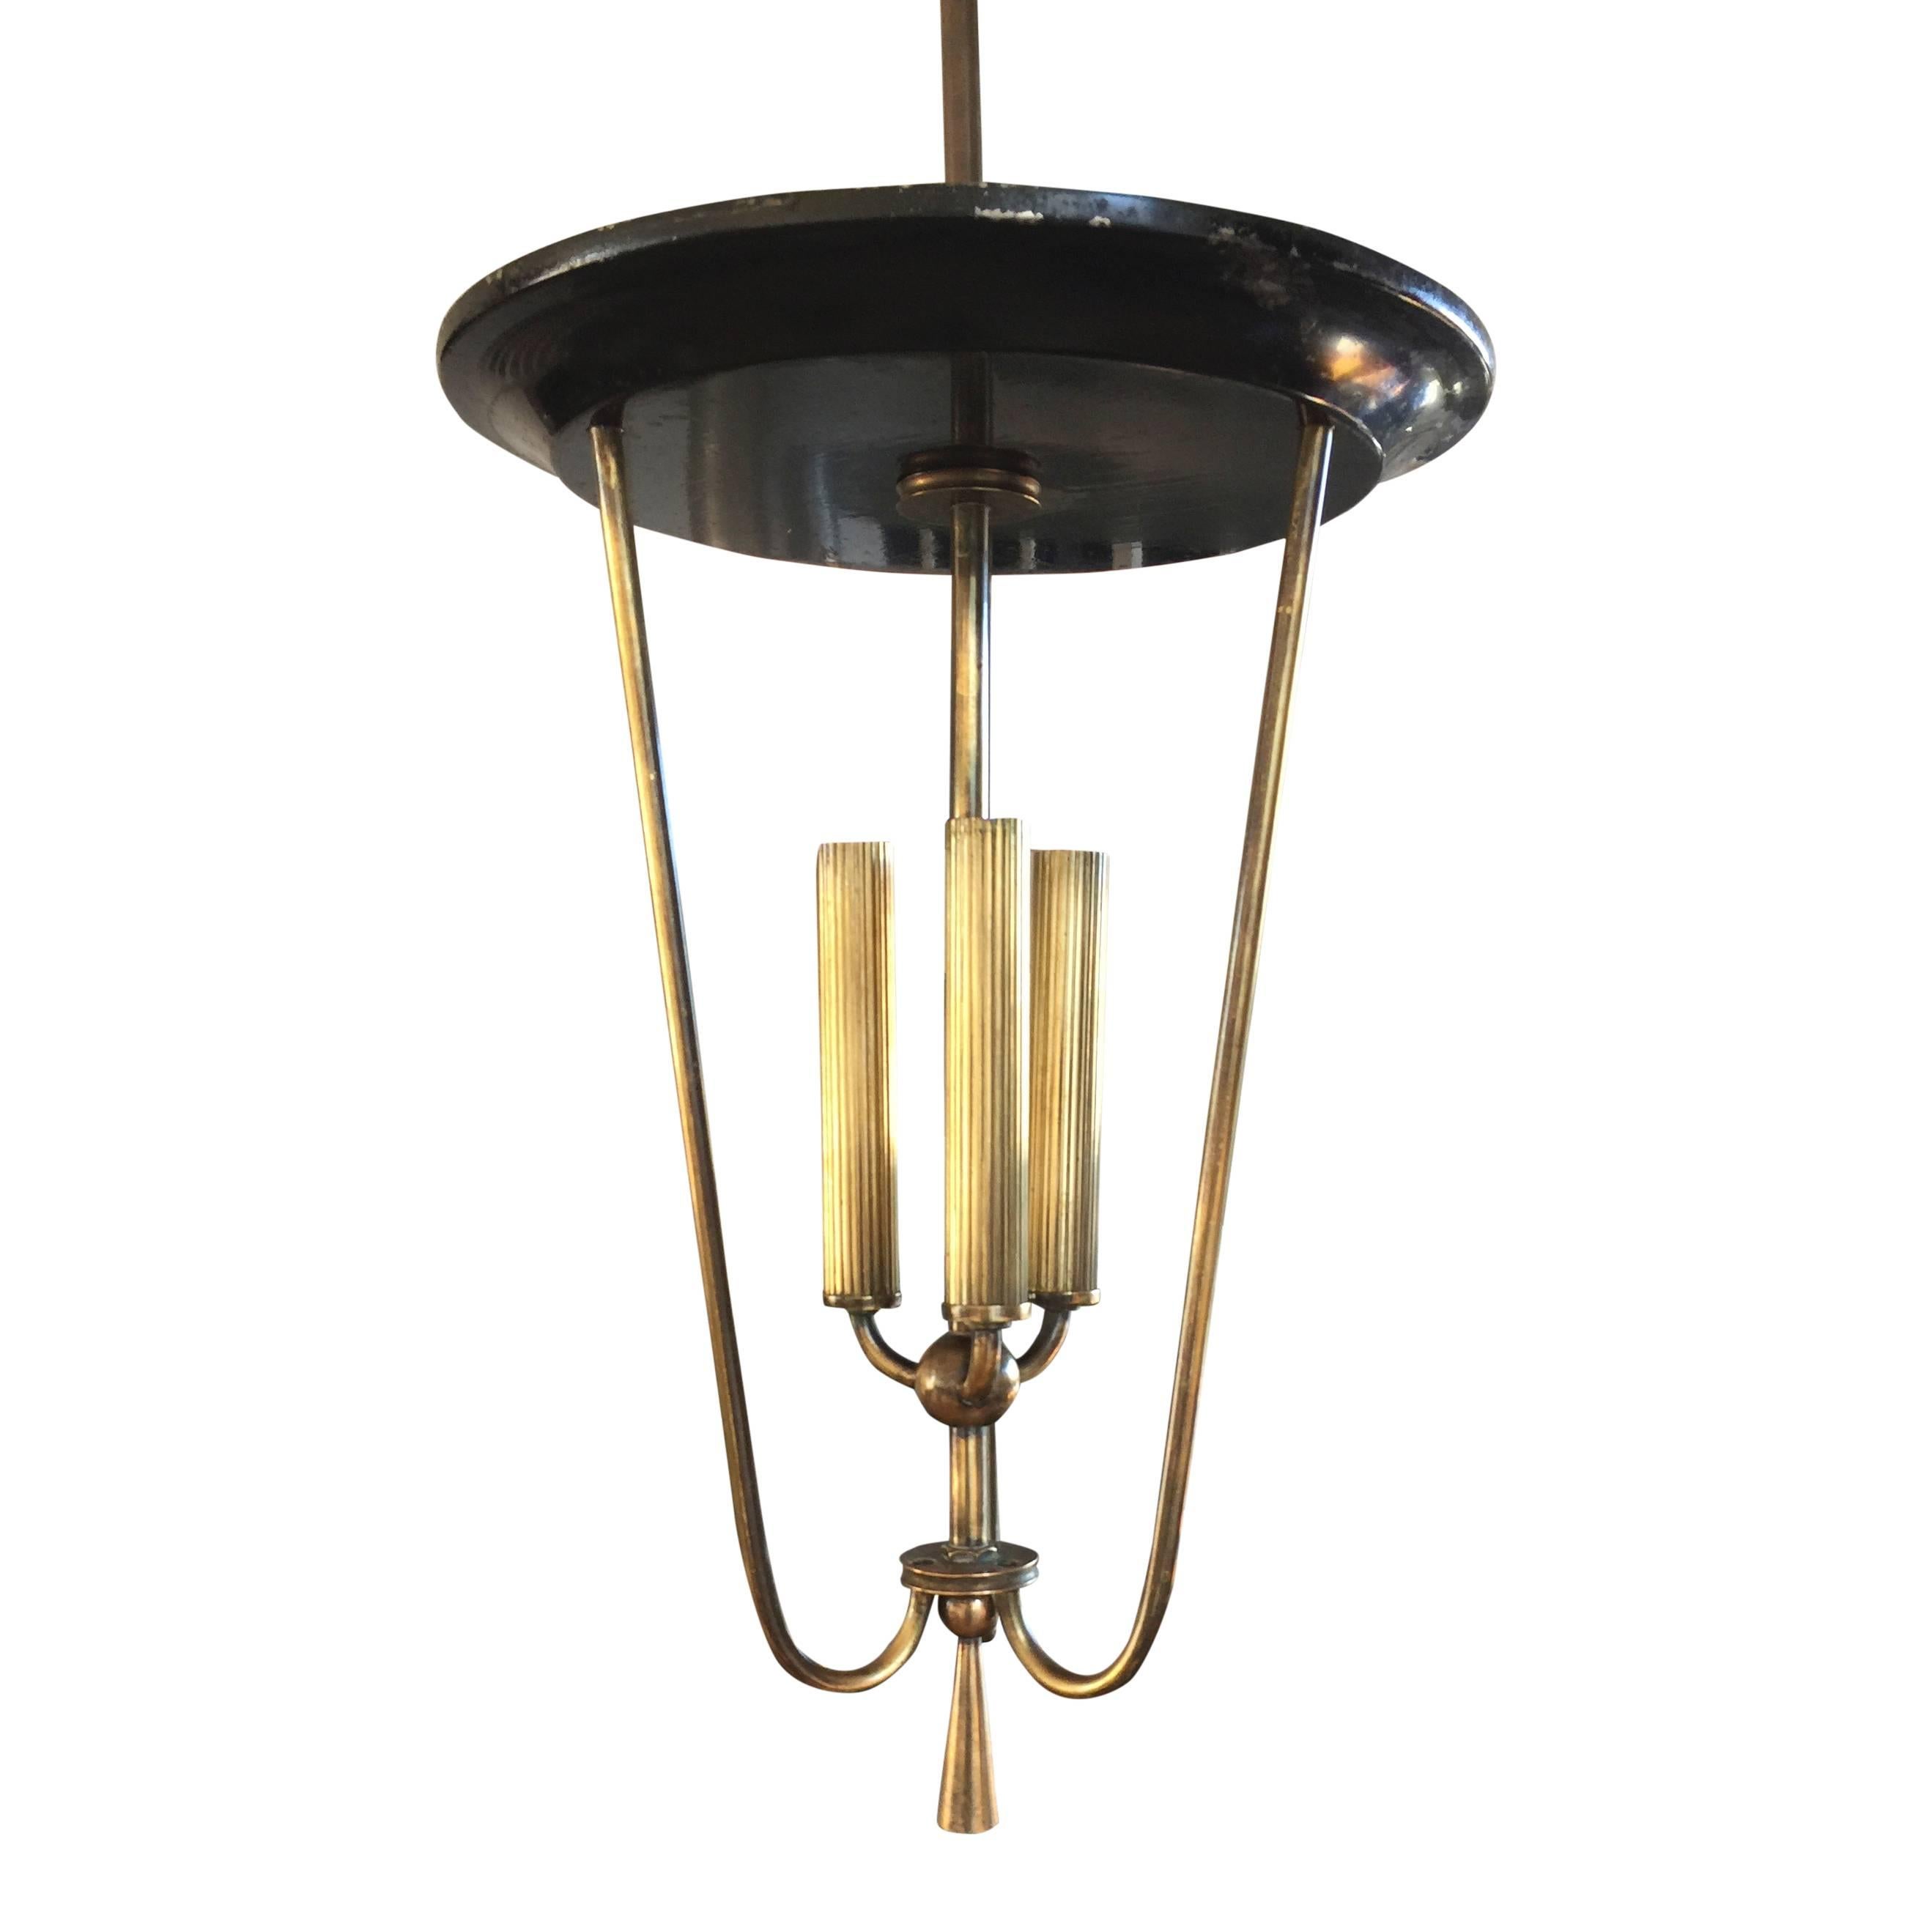 Elegant minimalist bronze and lacquered steel three-light chandelier by Arlus, France.
Beautiful details.
European socket and wiring.
Original patinated lacquer has been left as is, some scratches on lacquer.
This item will ship from